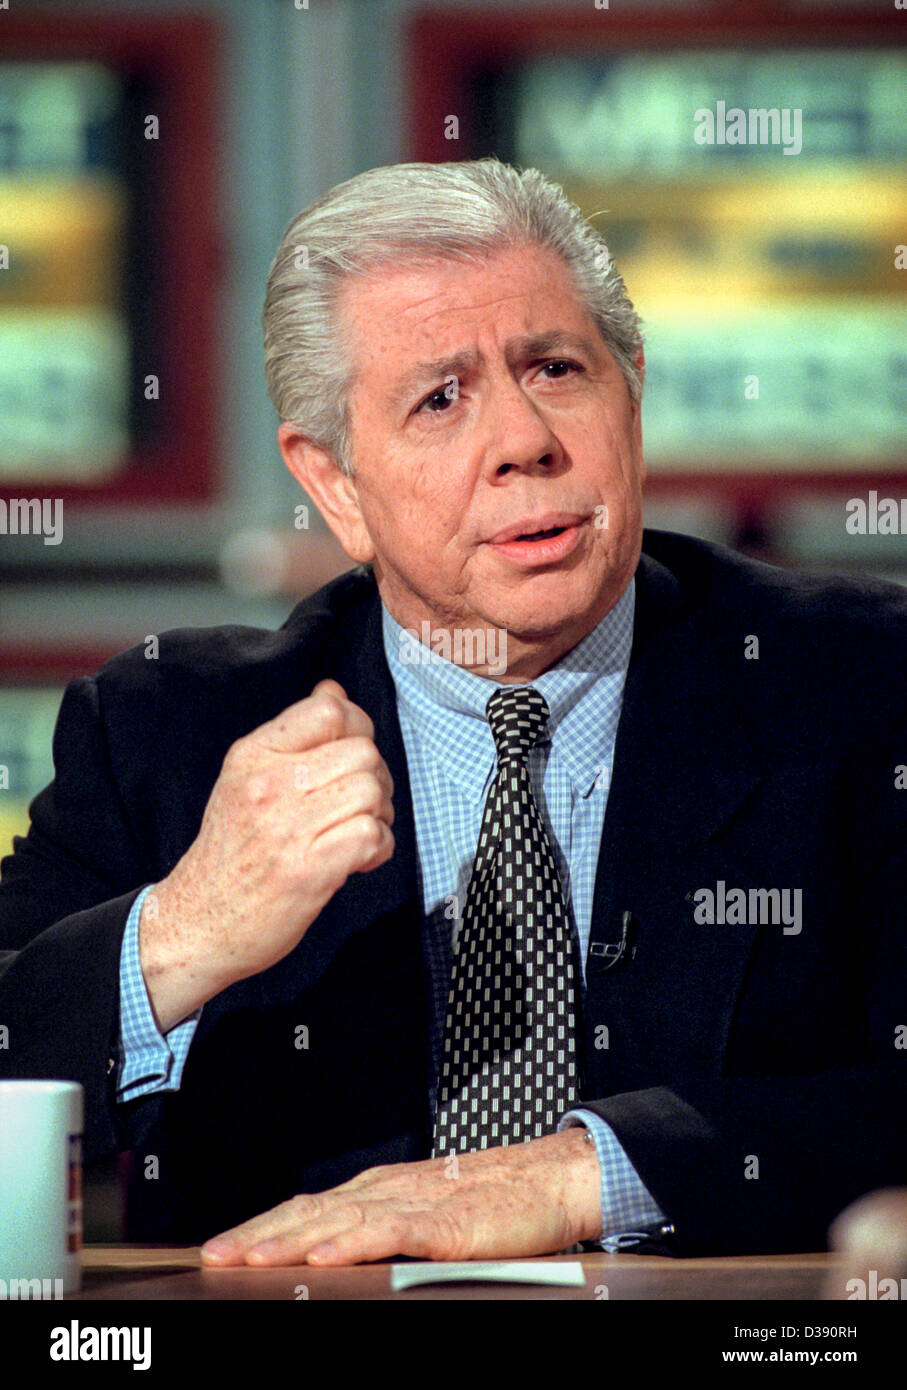 Investigative reporter Carl Bernstein of Watergate fame discusses the impeachment of President Clinton during NBC's Meet the Press December 13, 1998 in Washington, DC. Stock Photo